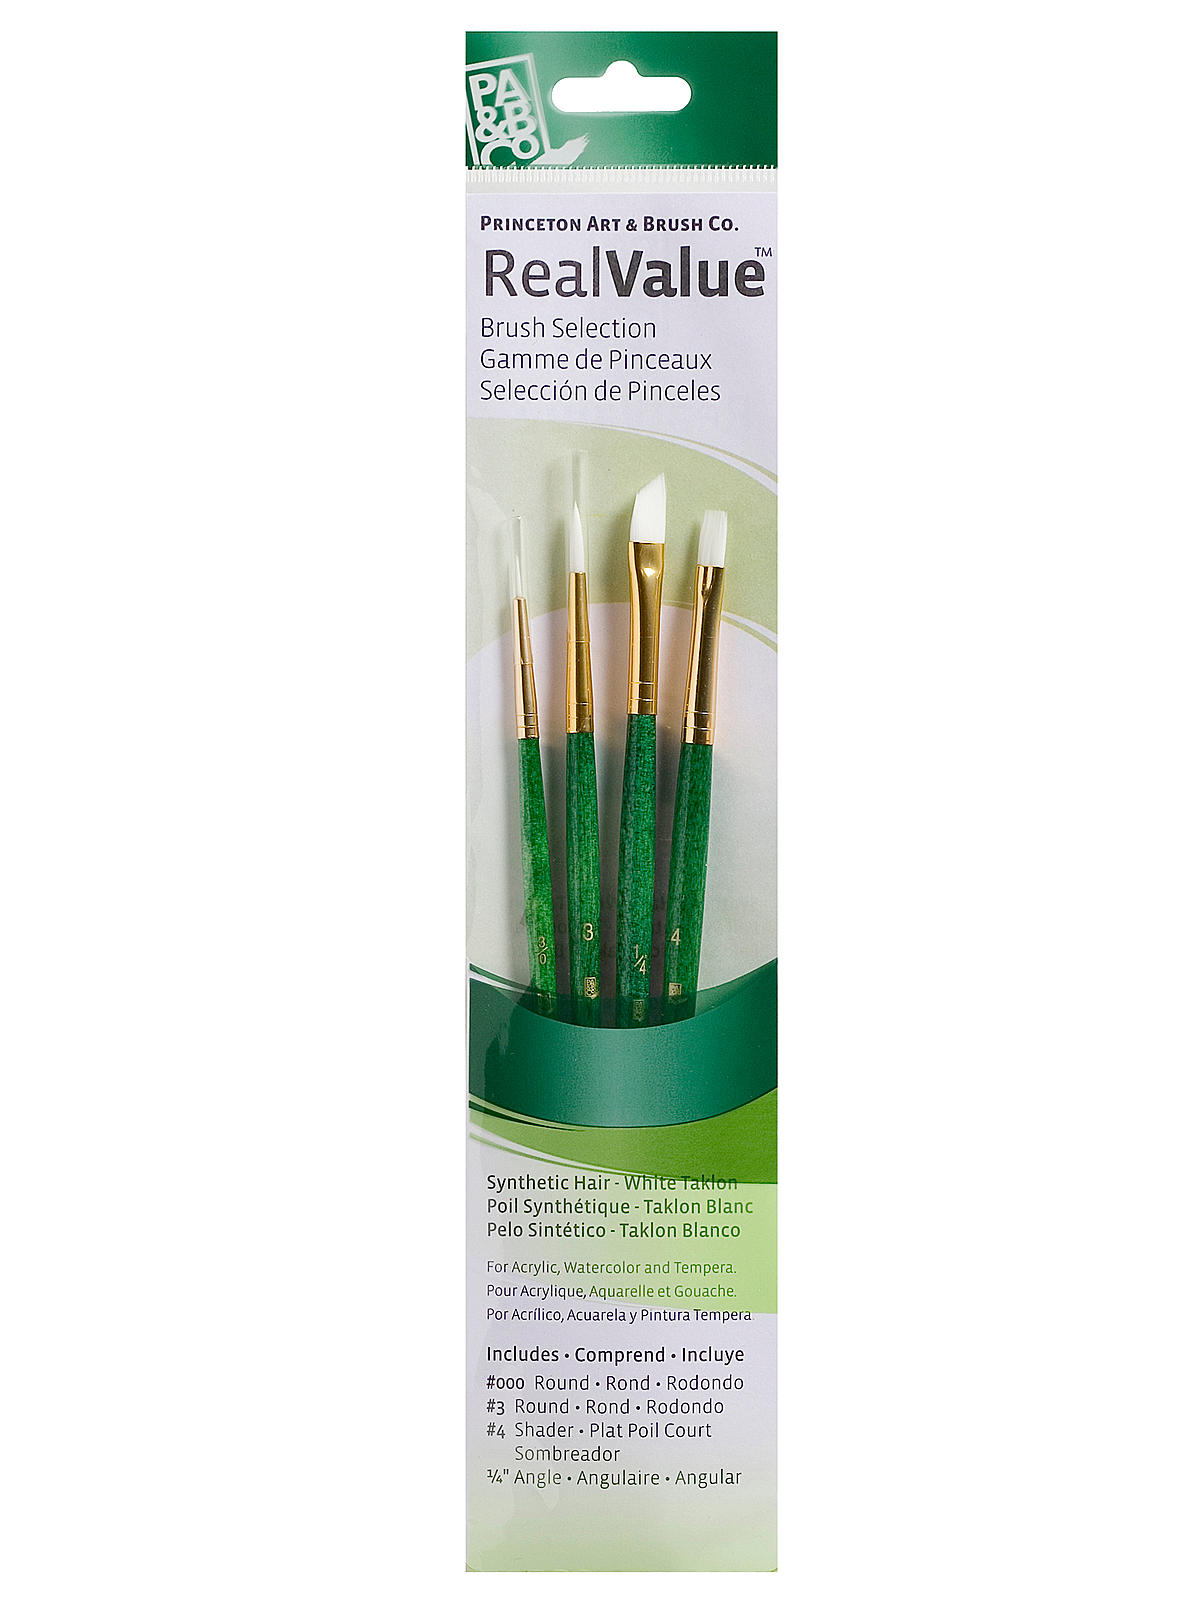 Real Value Series 9000 Green Handled Brush Sets 9117 Set Of 4